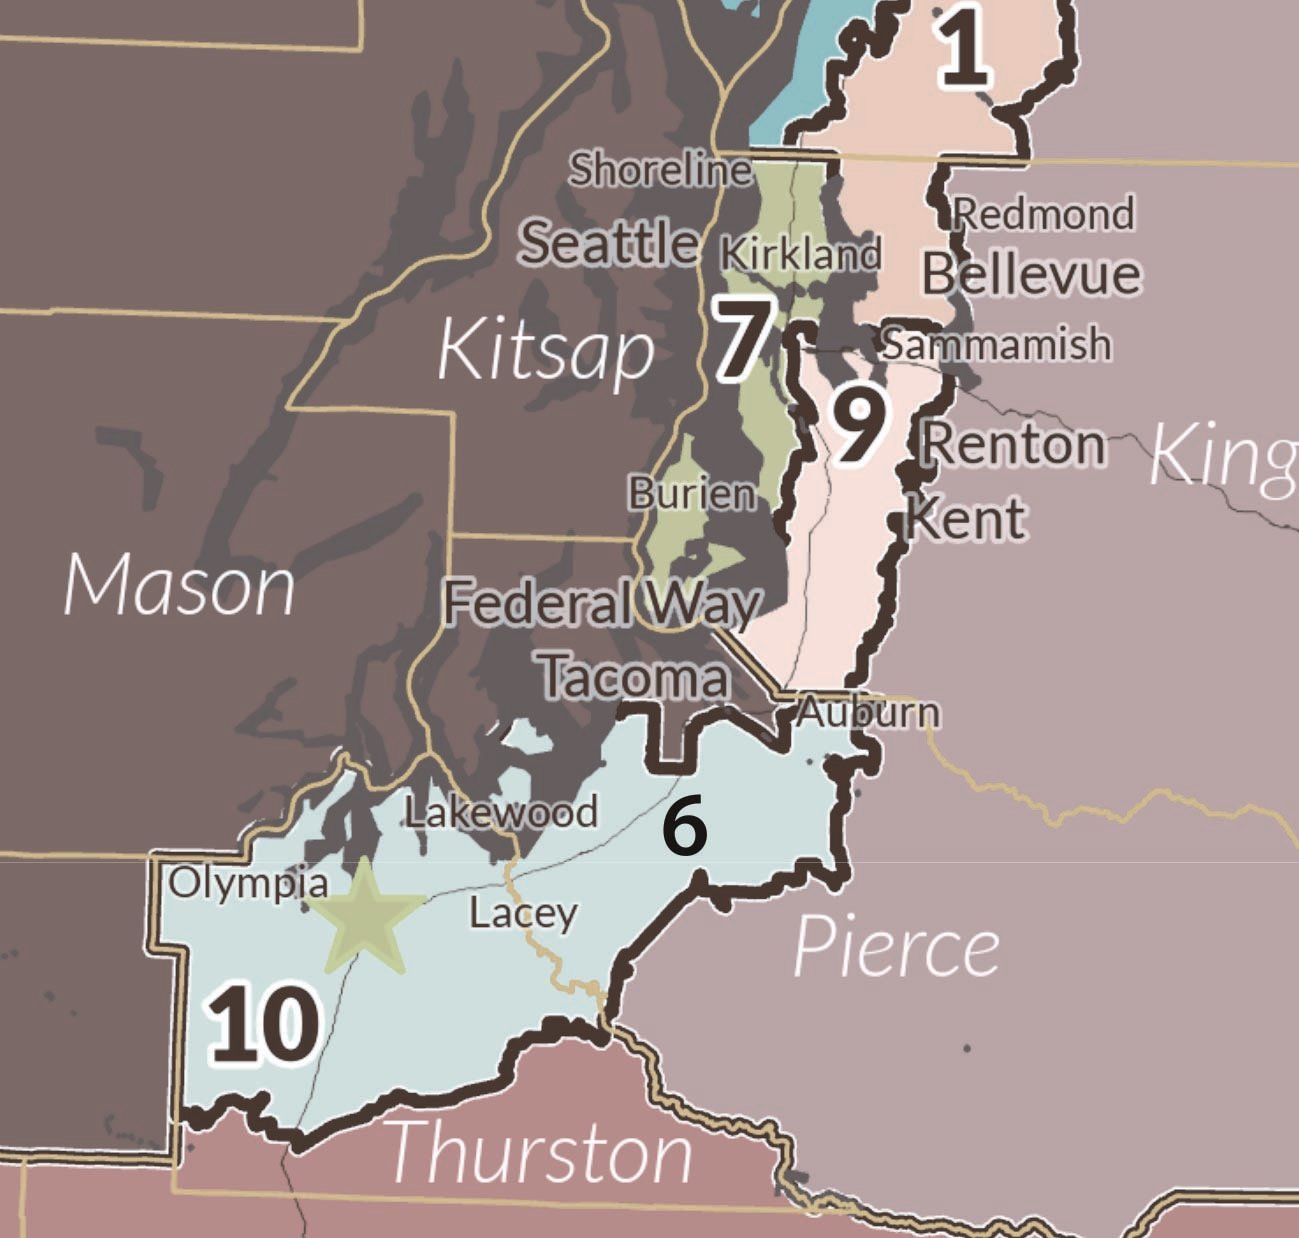 If proposed redistricting map for Congressional District is accepted the Key Peninsula will remain in relatively unchanged 6th congressional district.